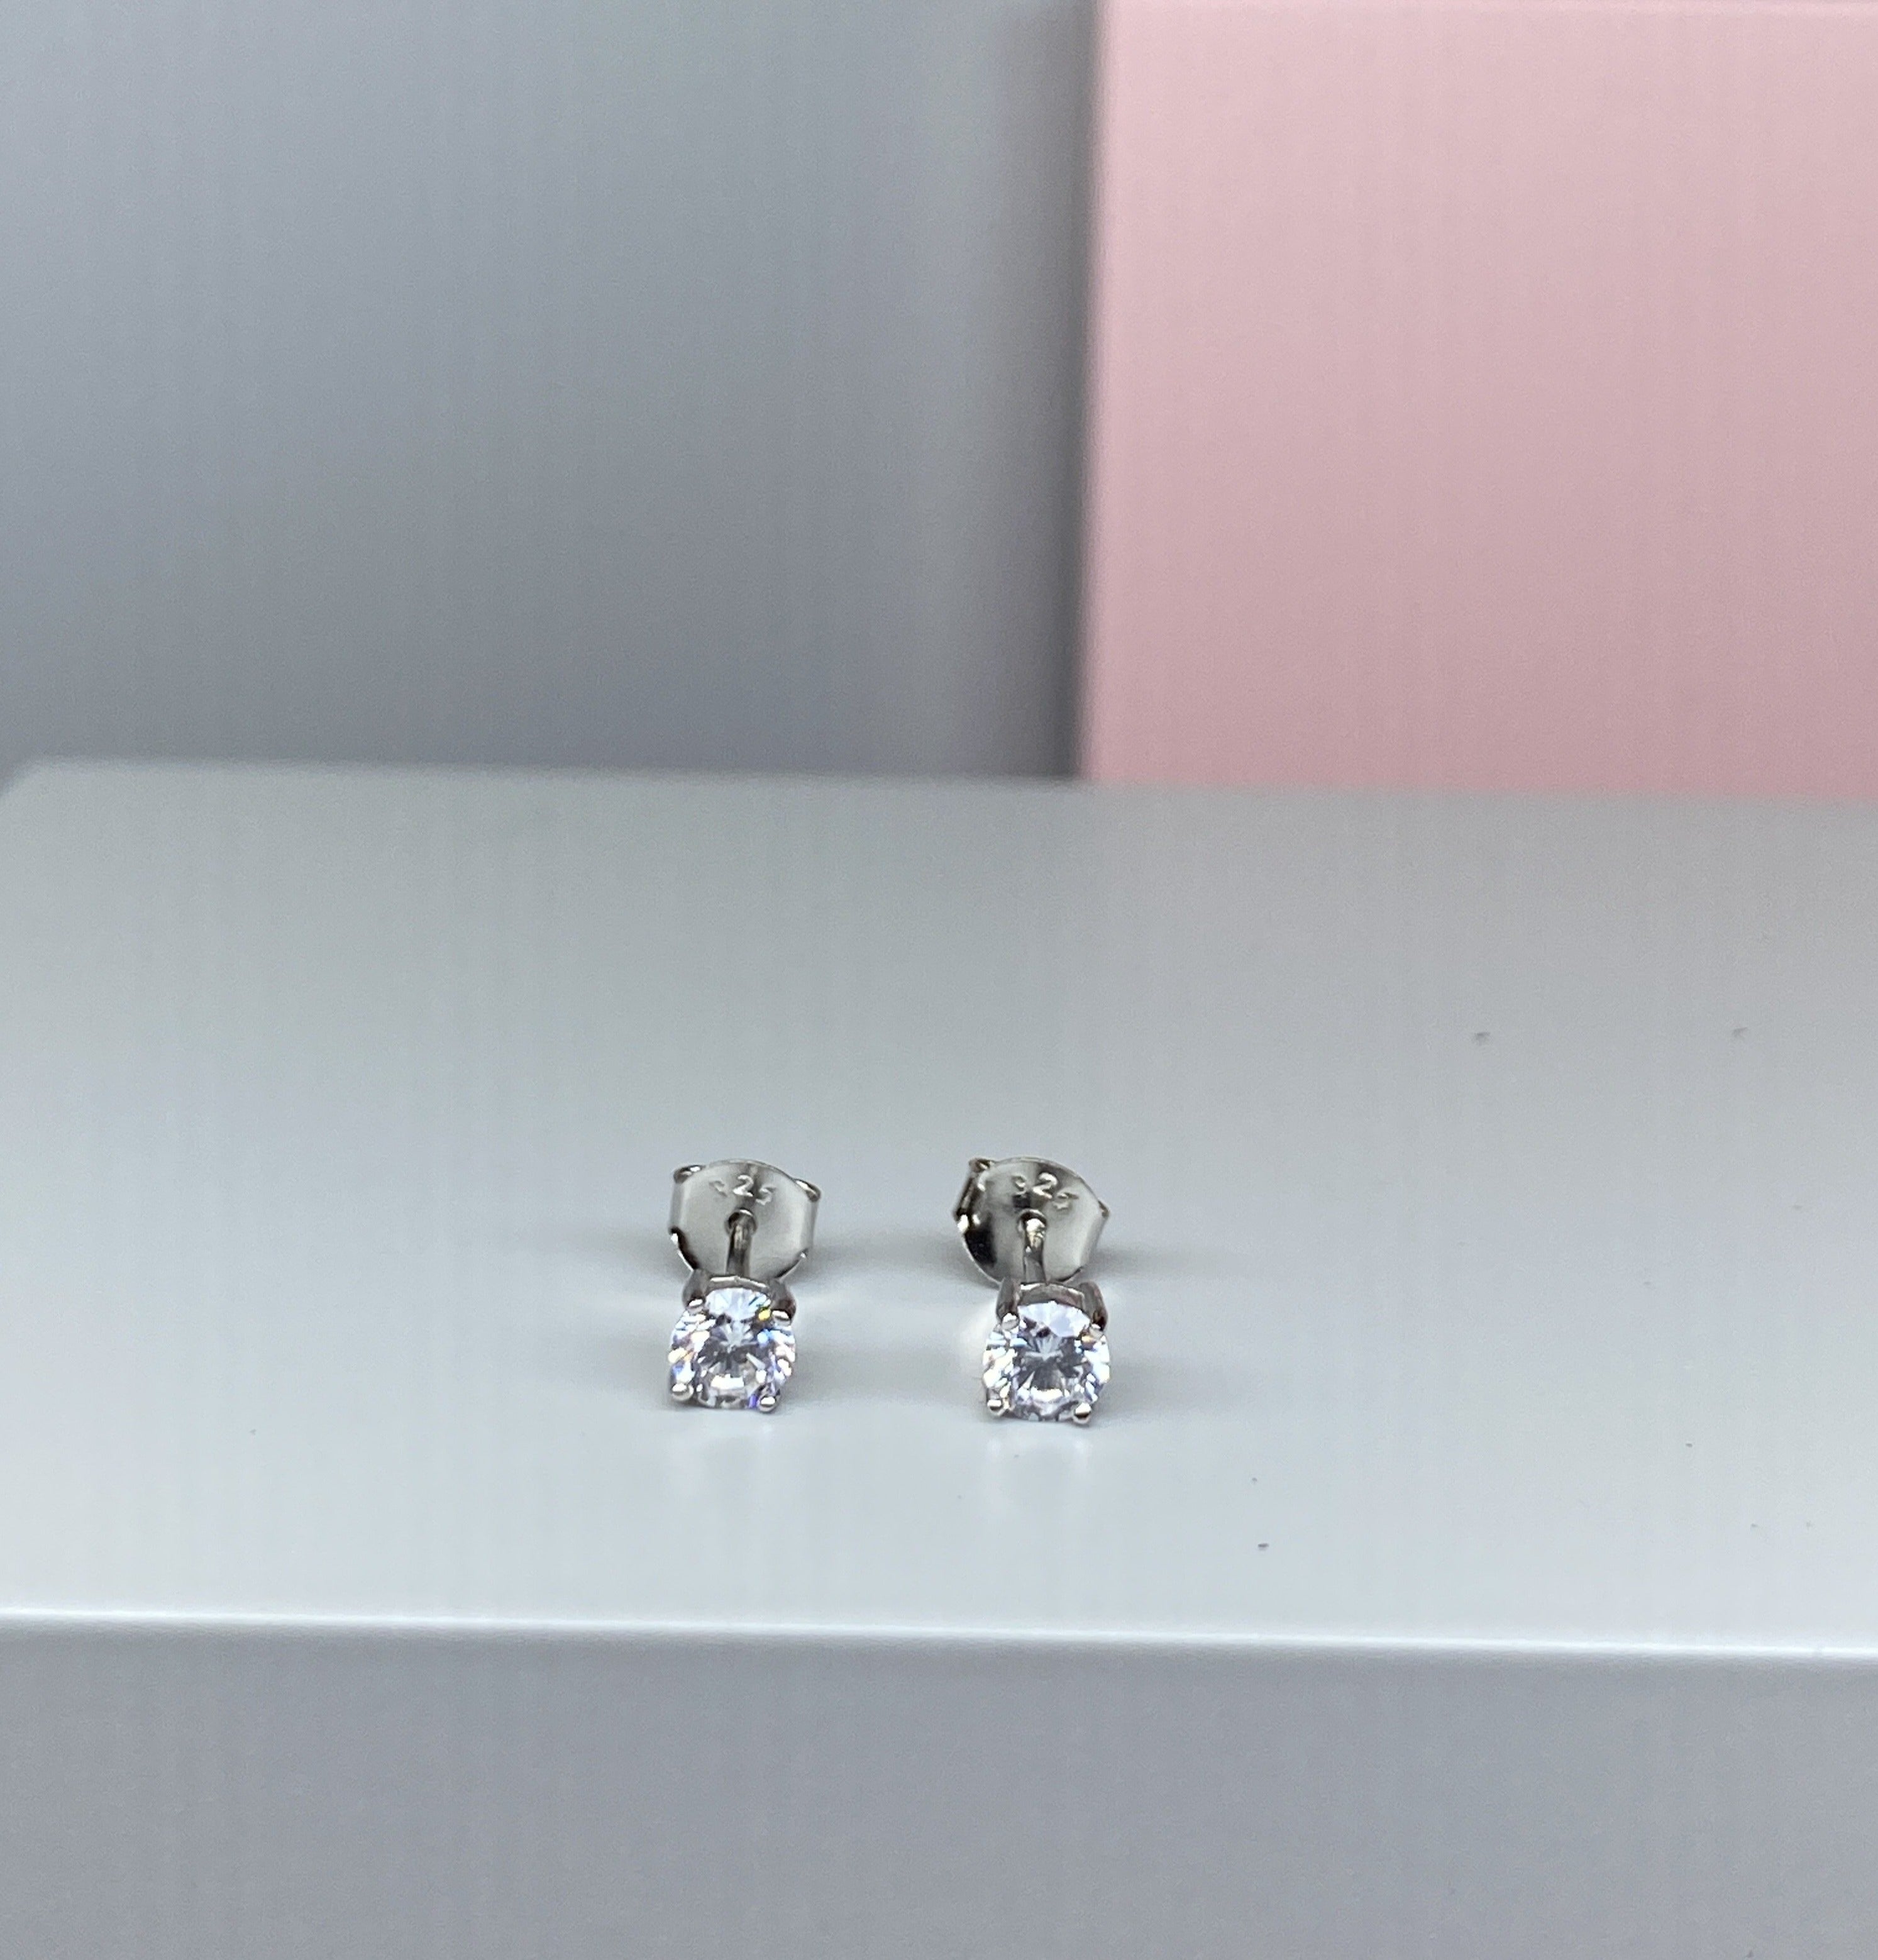 Sterling Silver Round CZ Earrings - 4mm - Hallmark Jewellers Formby & The Jewellers Bench Widnes